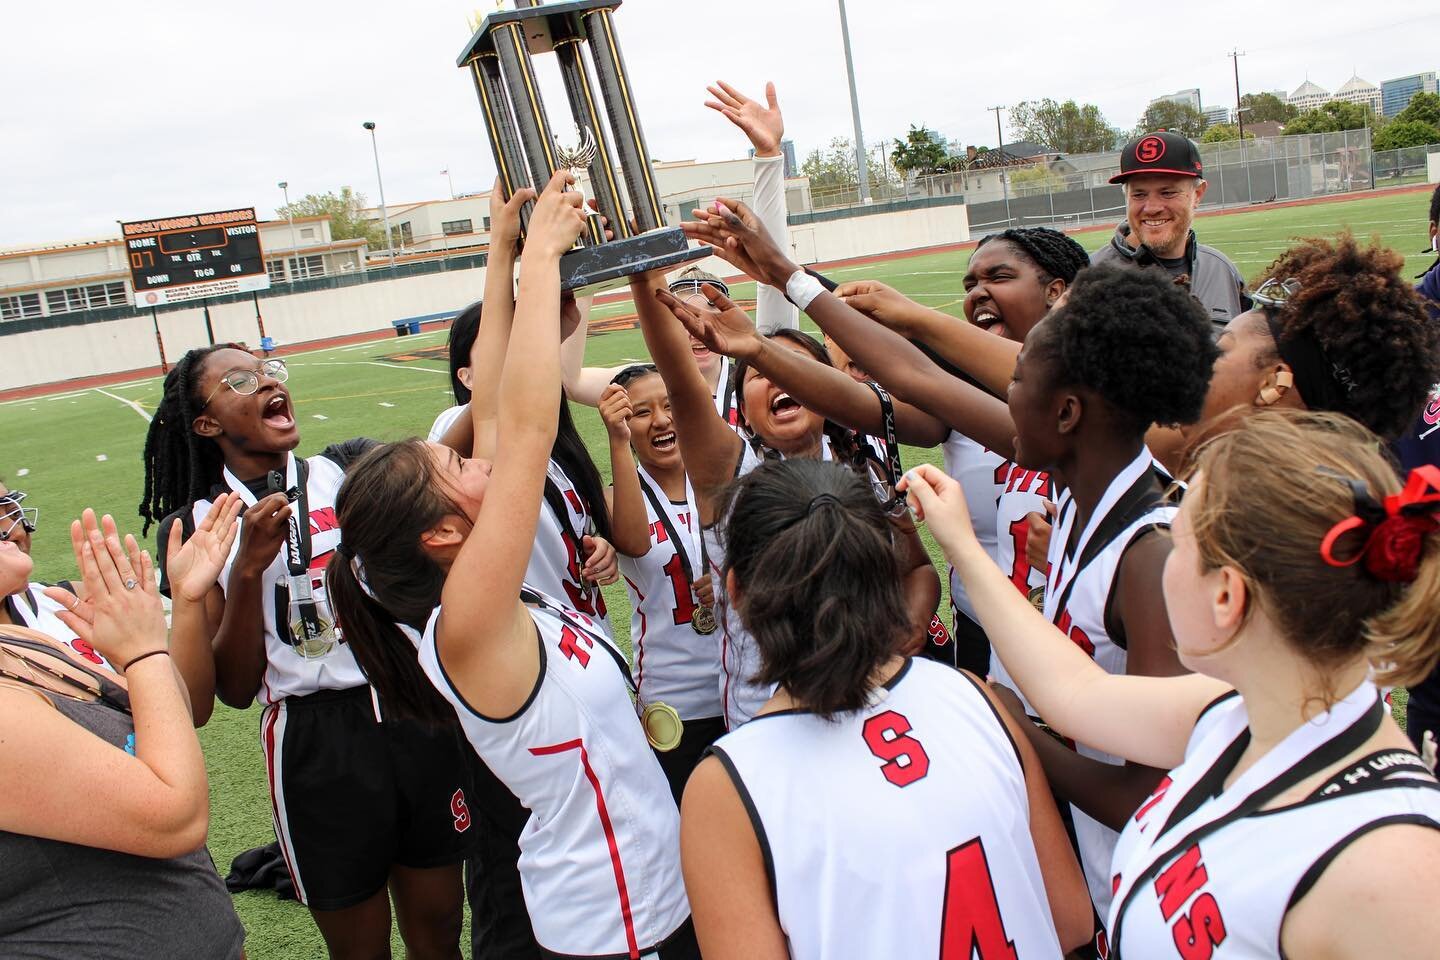 Saturday, May 20th brought the spring season to a close with the first-ever OAL Championship Game. The Skyline Titans beat the Oakland Tech Bulldogs 13-7 after a well-fought game. Both teams played with such heart and the second half had everyone on 